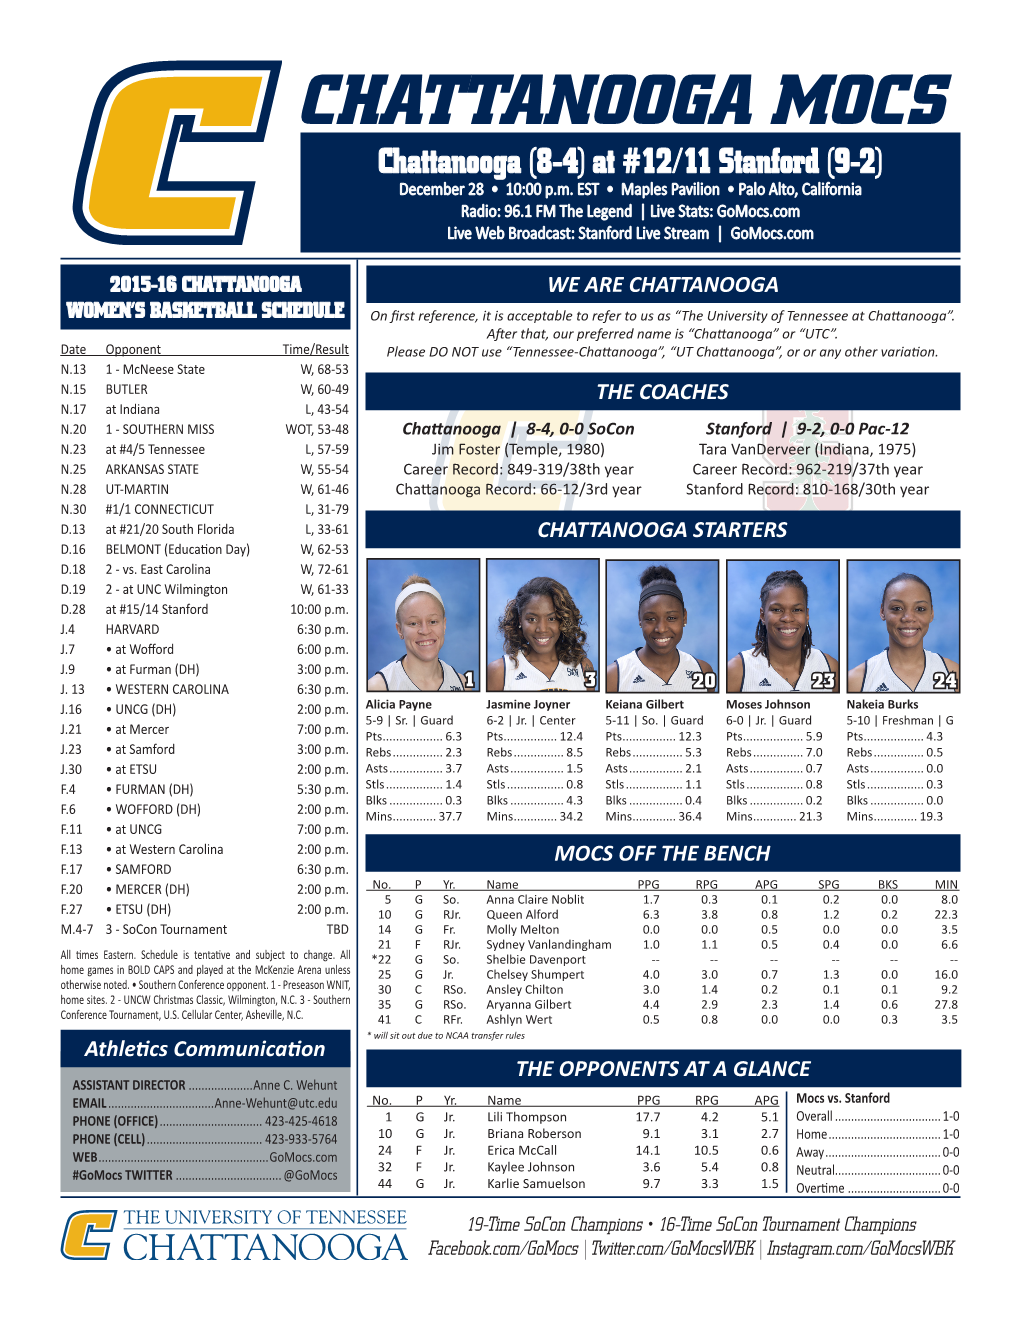 CHATTANOOGA MOCS Chattanooga (8-4) at #12/11 Stanford (9-2) December 28 • 10:00 P.M